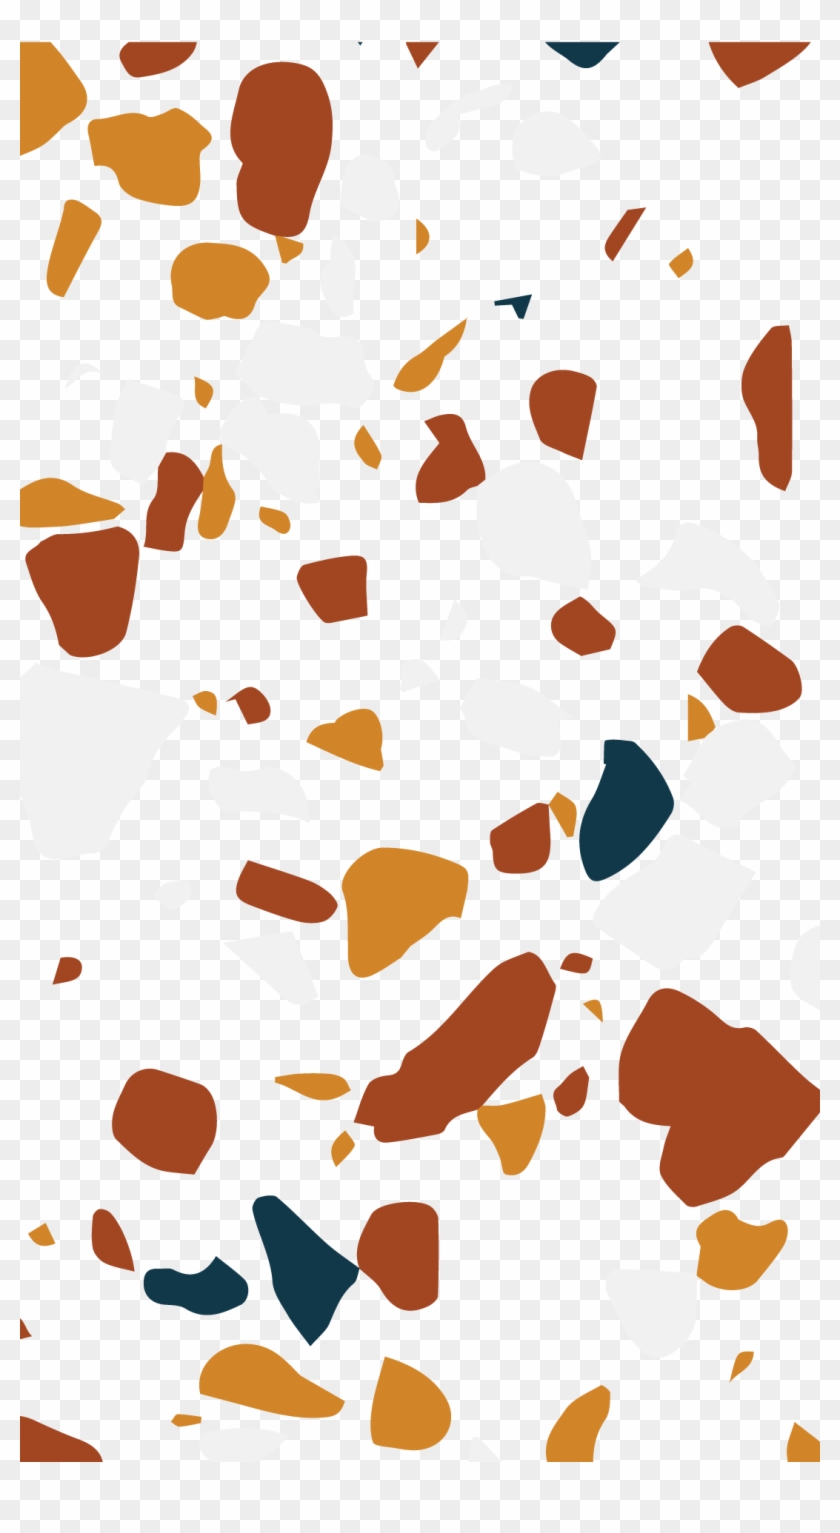 Download Free Vector Of Colorful Terrazzo Seamless, HD Png